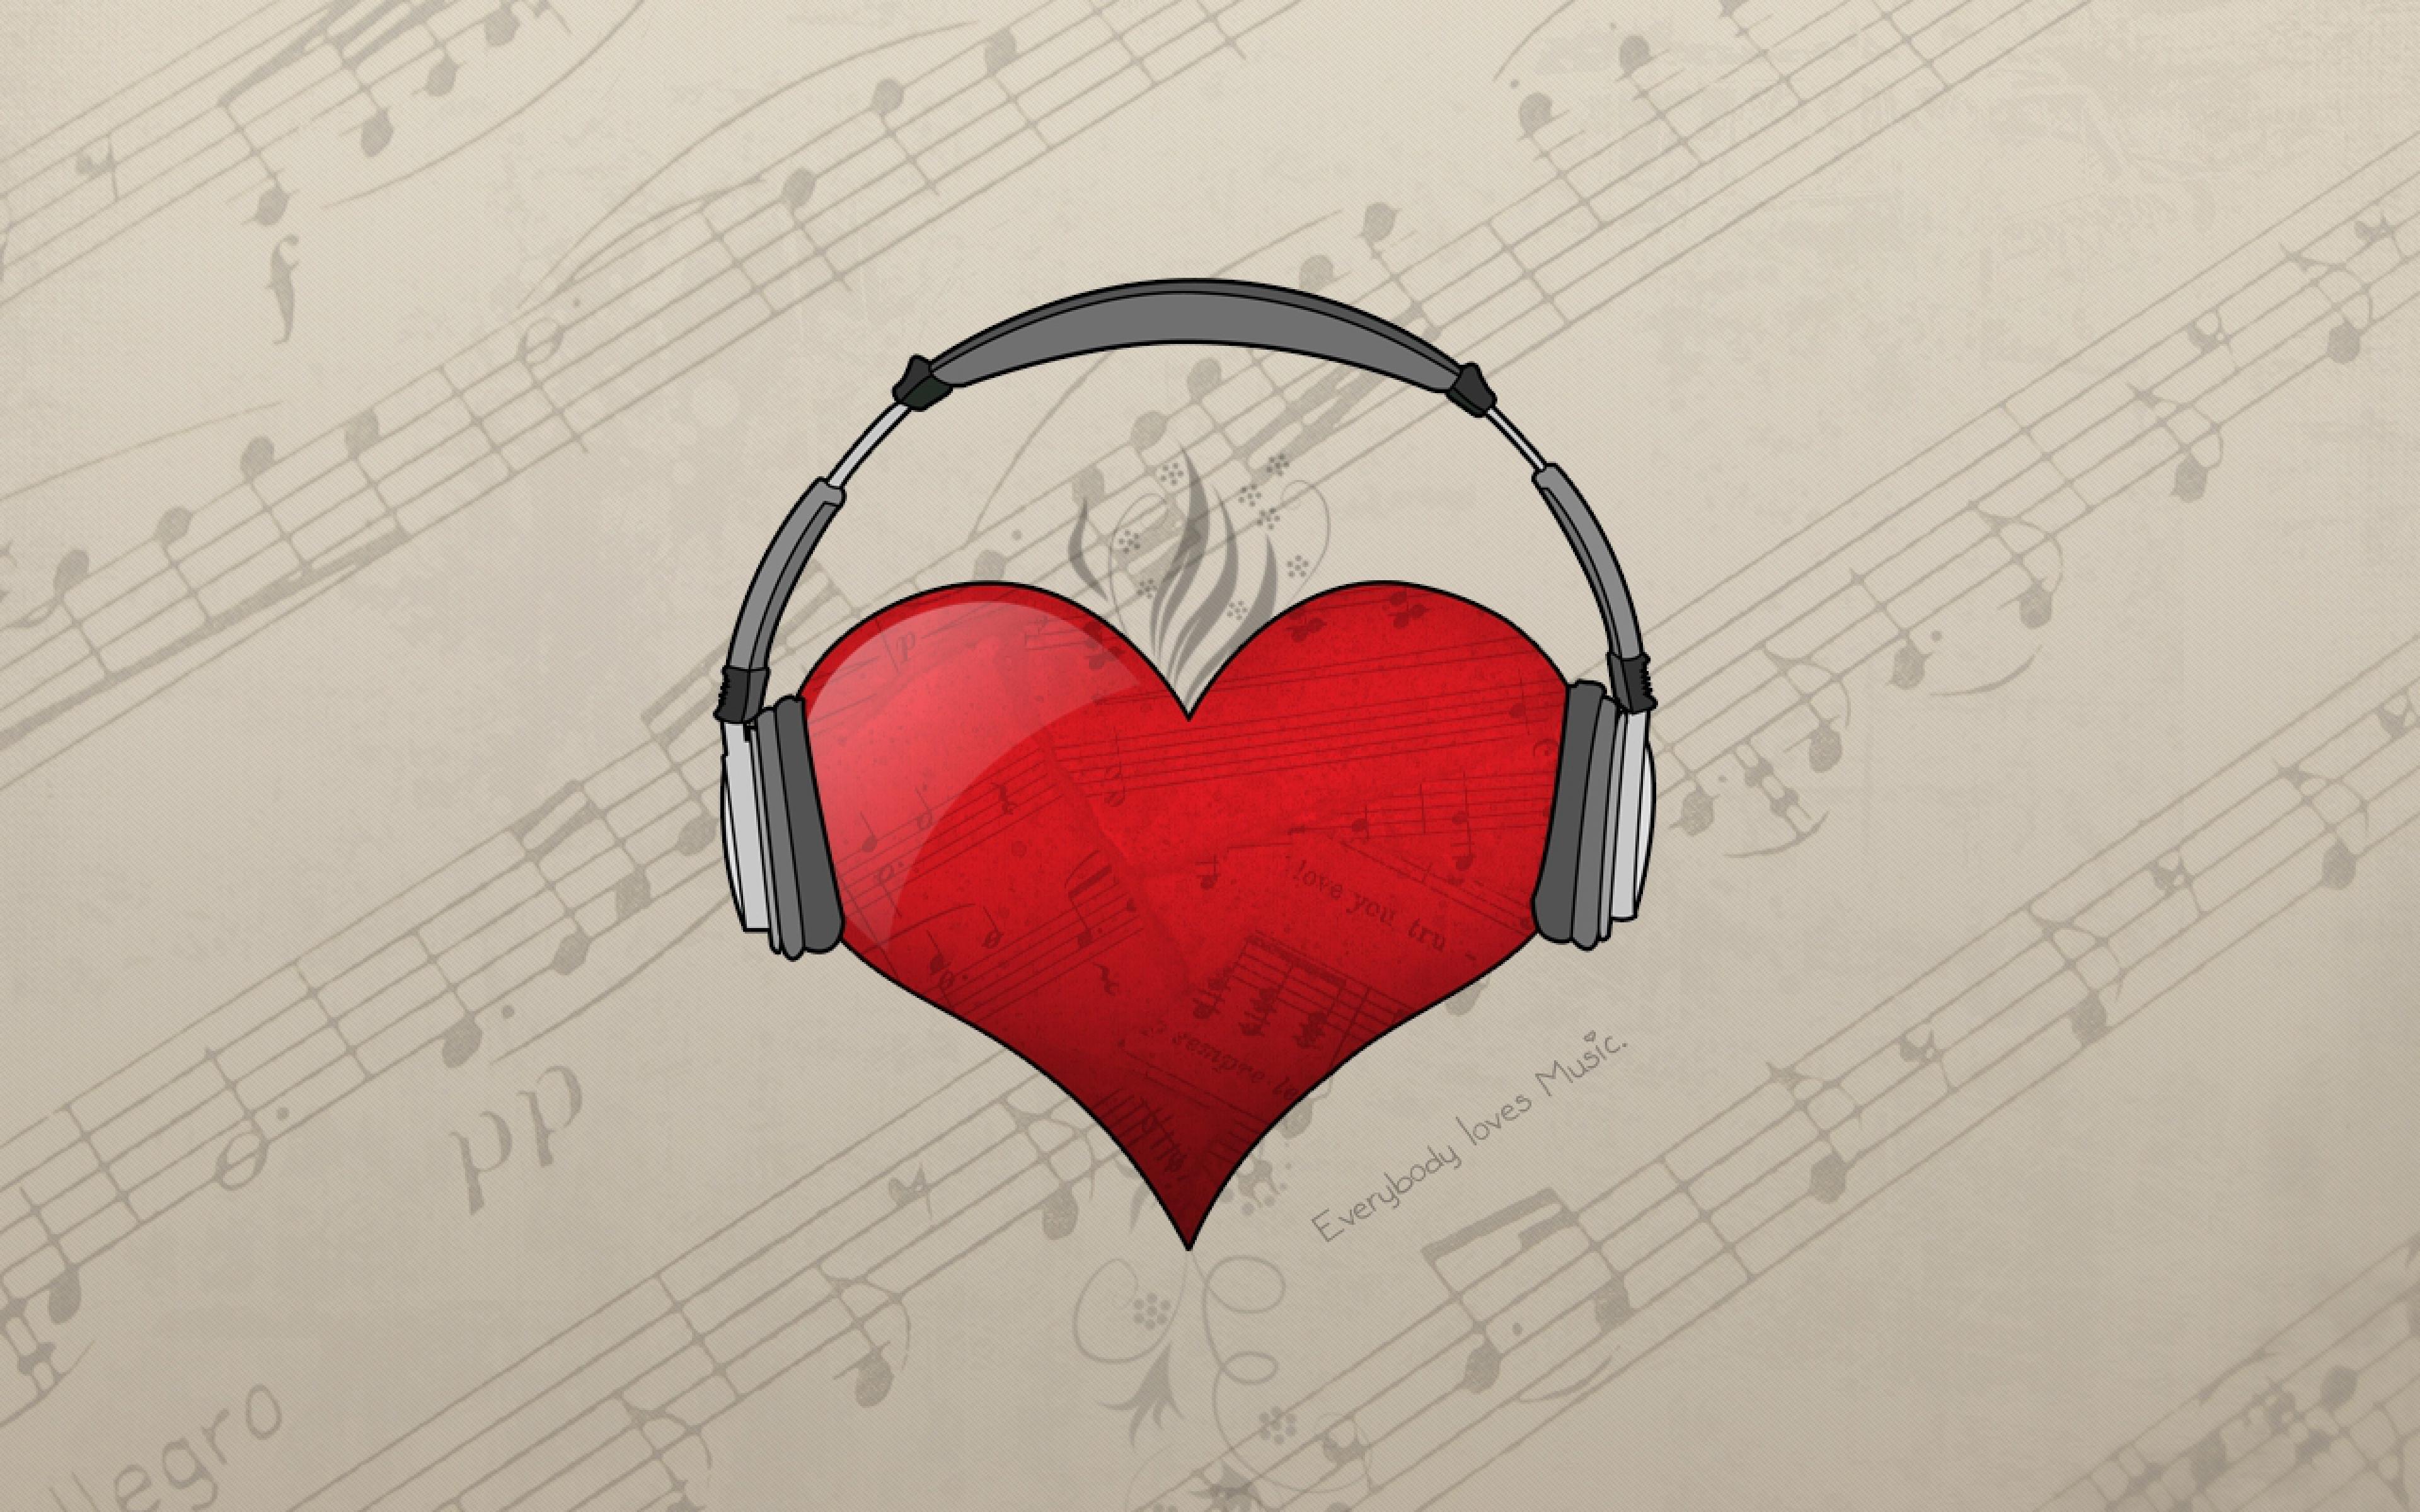 Headphones Drawing With Heart HD Wallpaper, Background Image